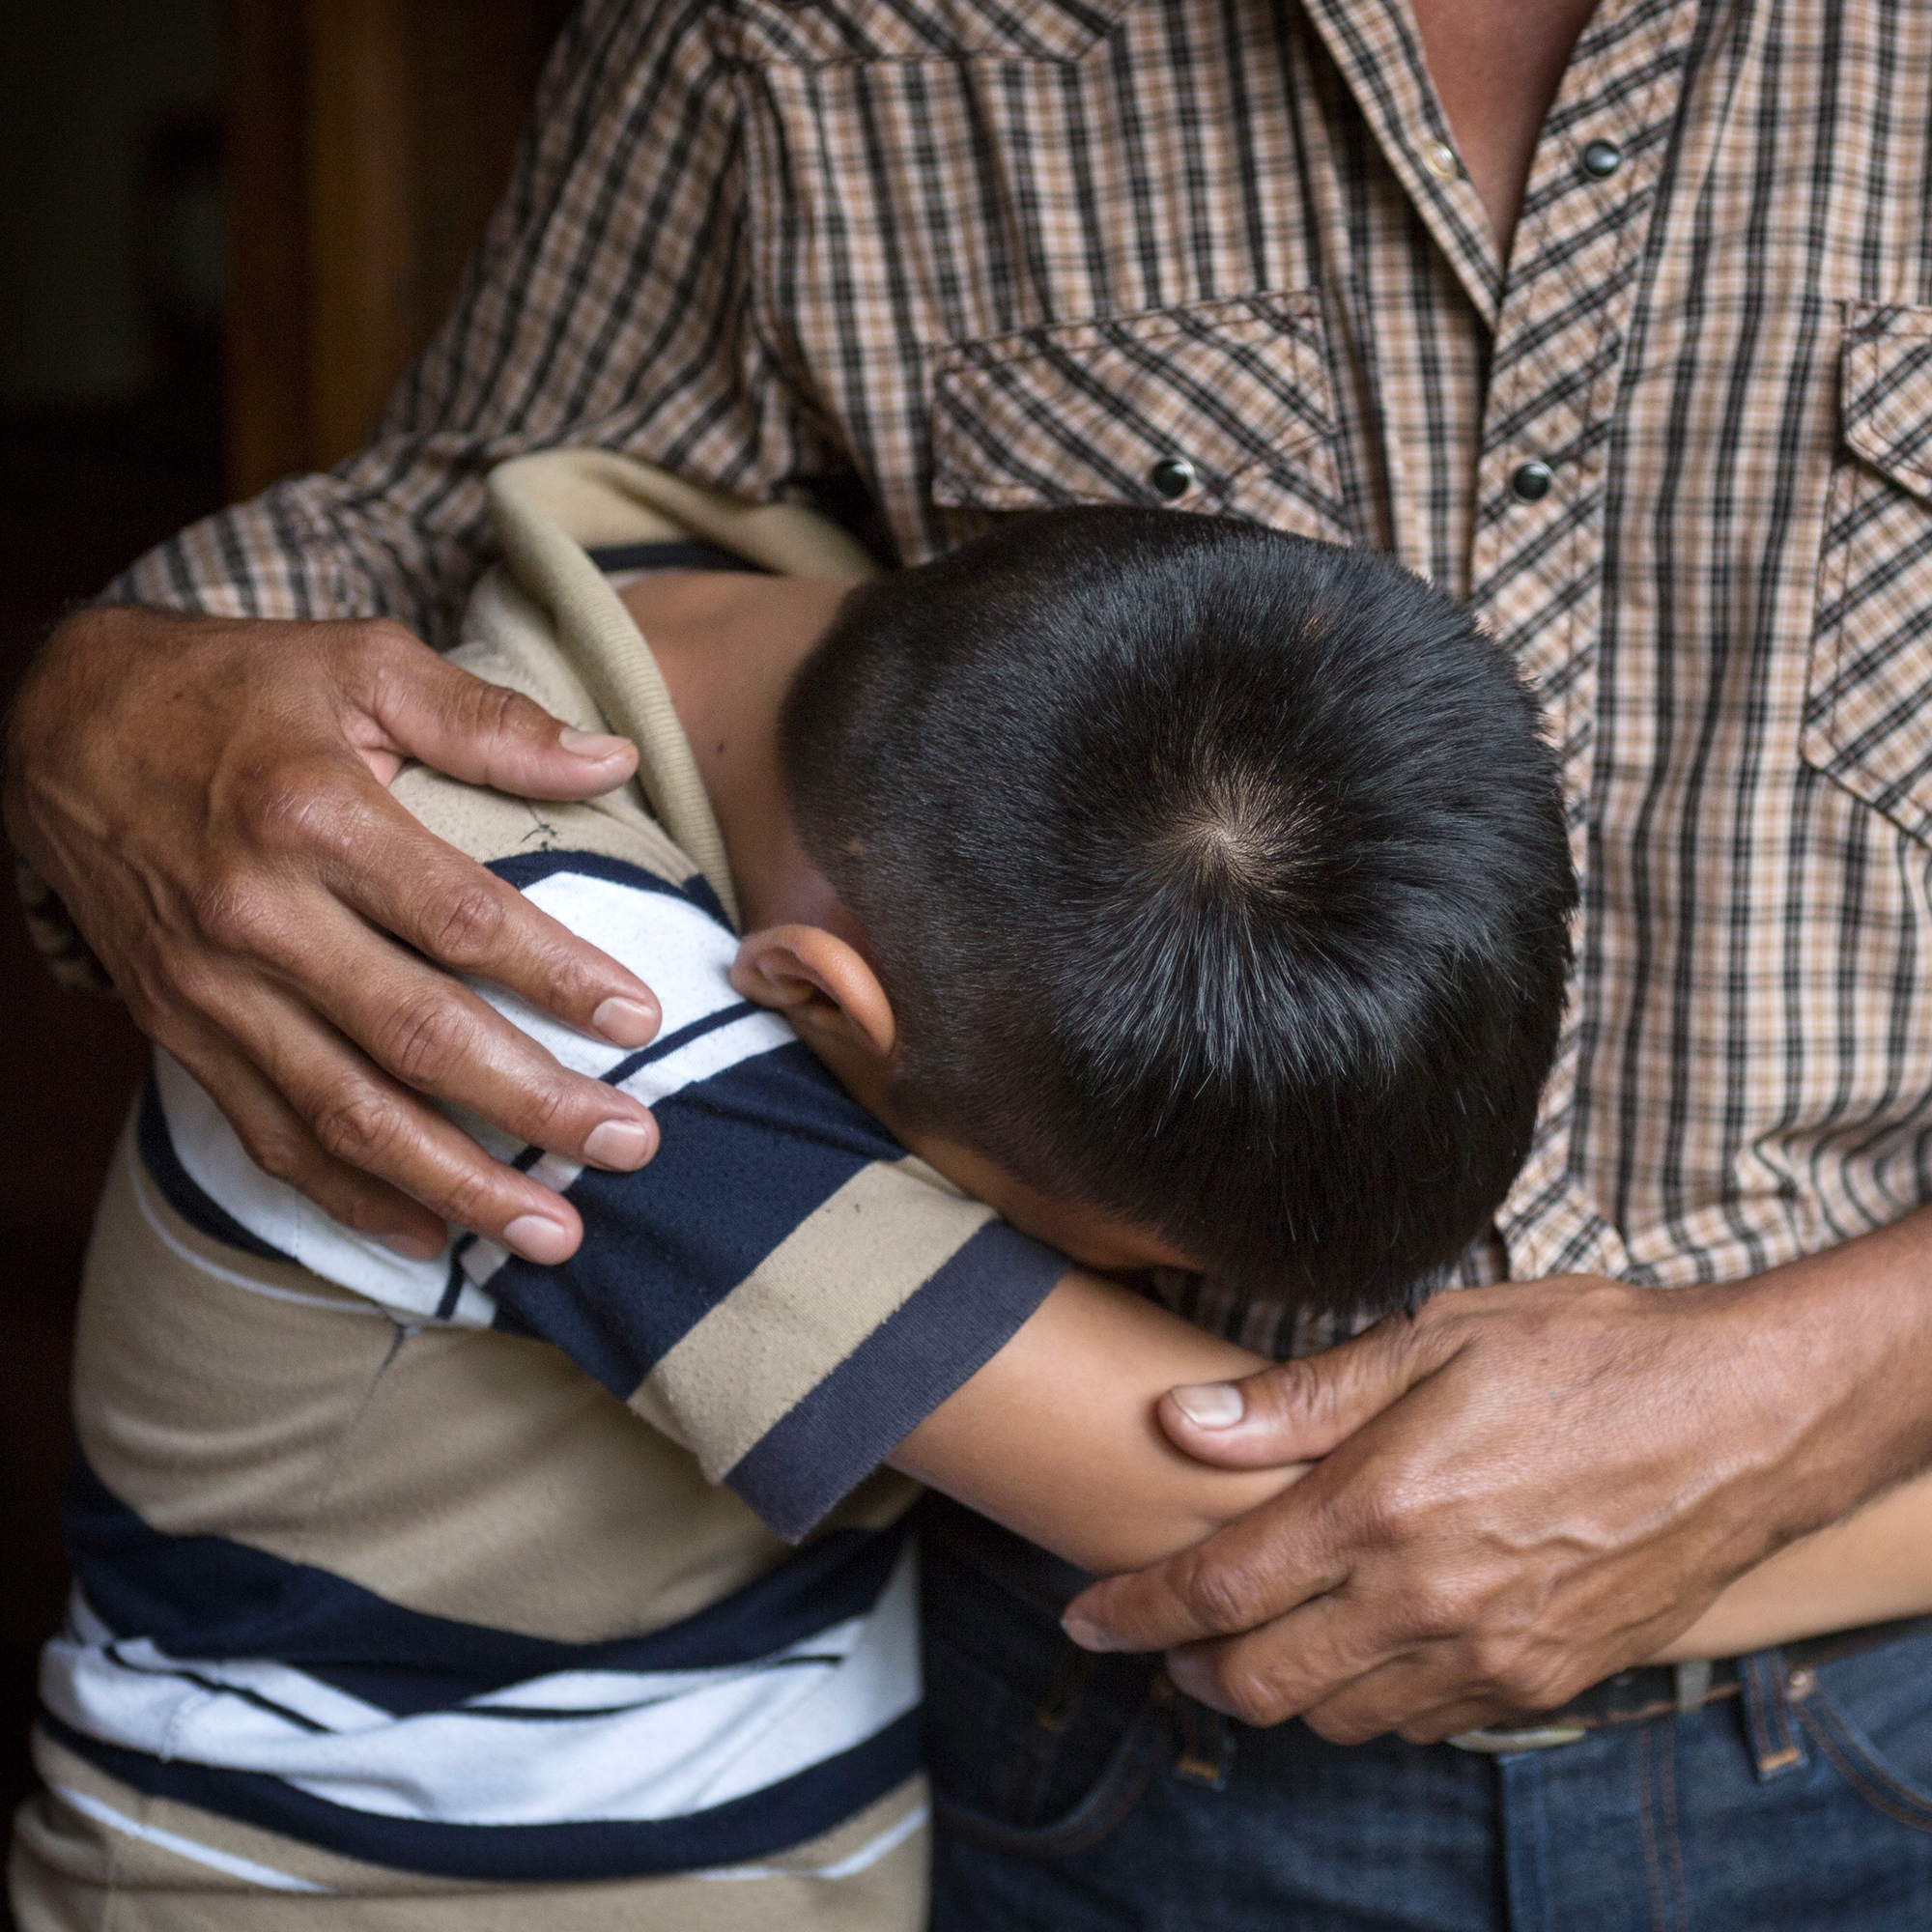 An El Salvadorian father comforts his 12-year old son. The boy lost his older brother to gang violence and the family cannot return home as a result. Save the Children is gravely concerned about the treatment and well-being of children from Central America and Mexico who are in the custody of the United States government after crossing the U.S.-Mexico border. Photo credit: Tom Pilston / Save the Children, May 2017